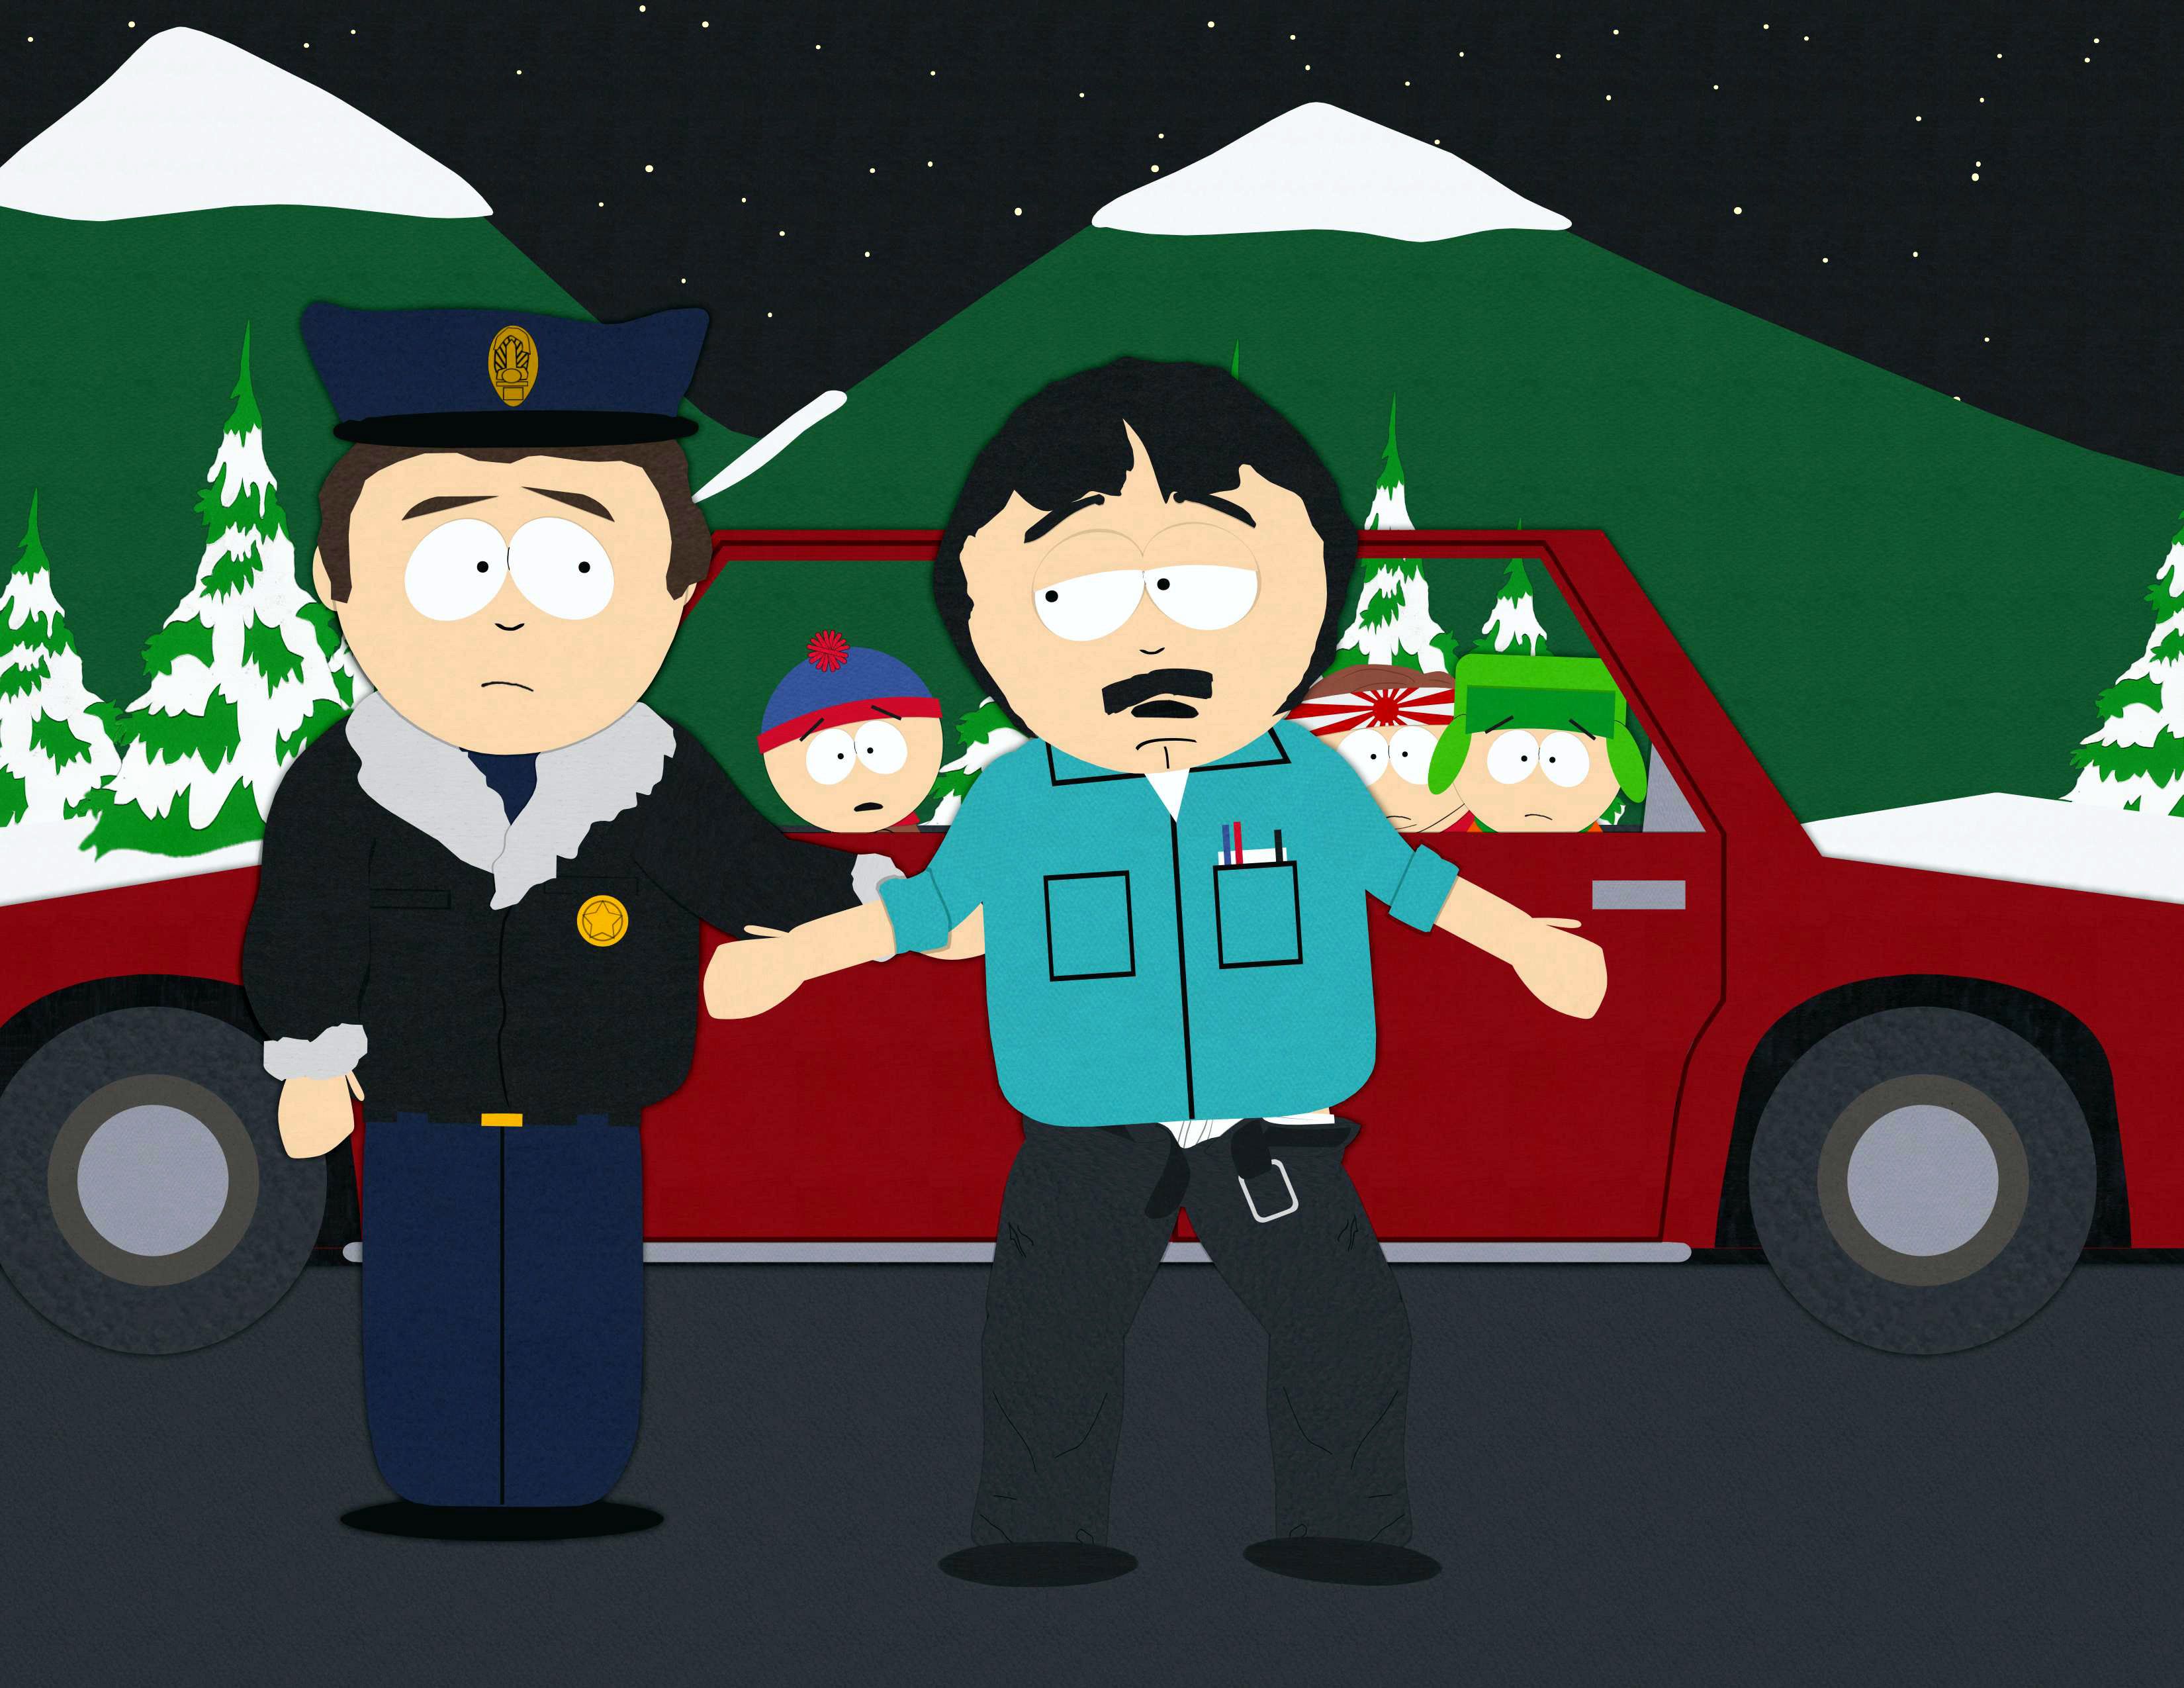 South Park: Randy Marsh gets pulled over for drunk driving